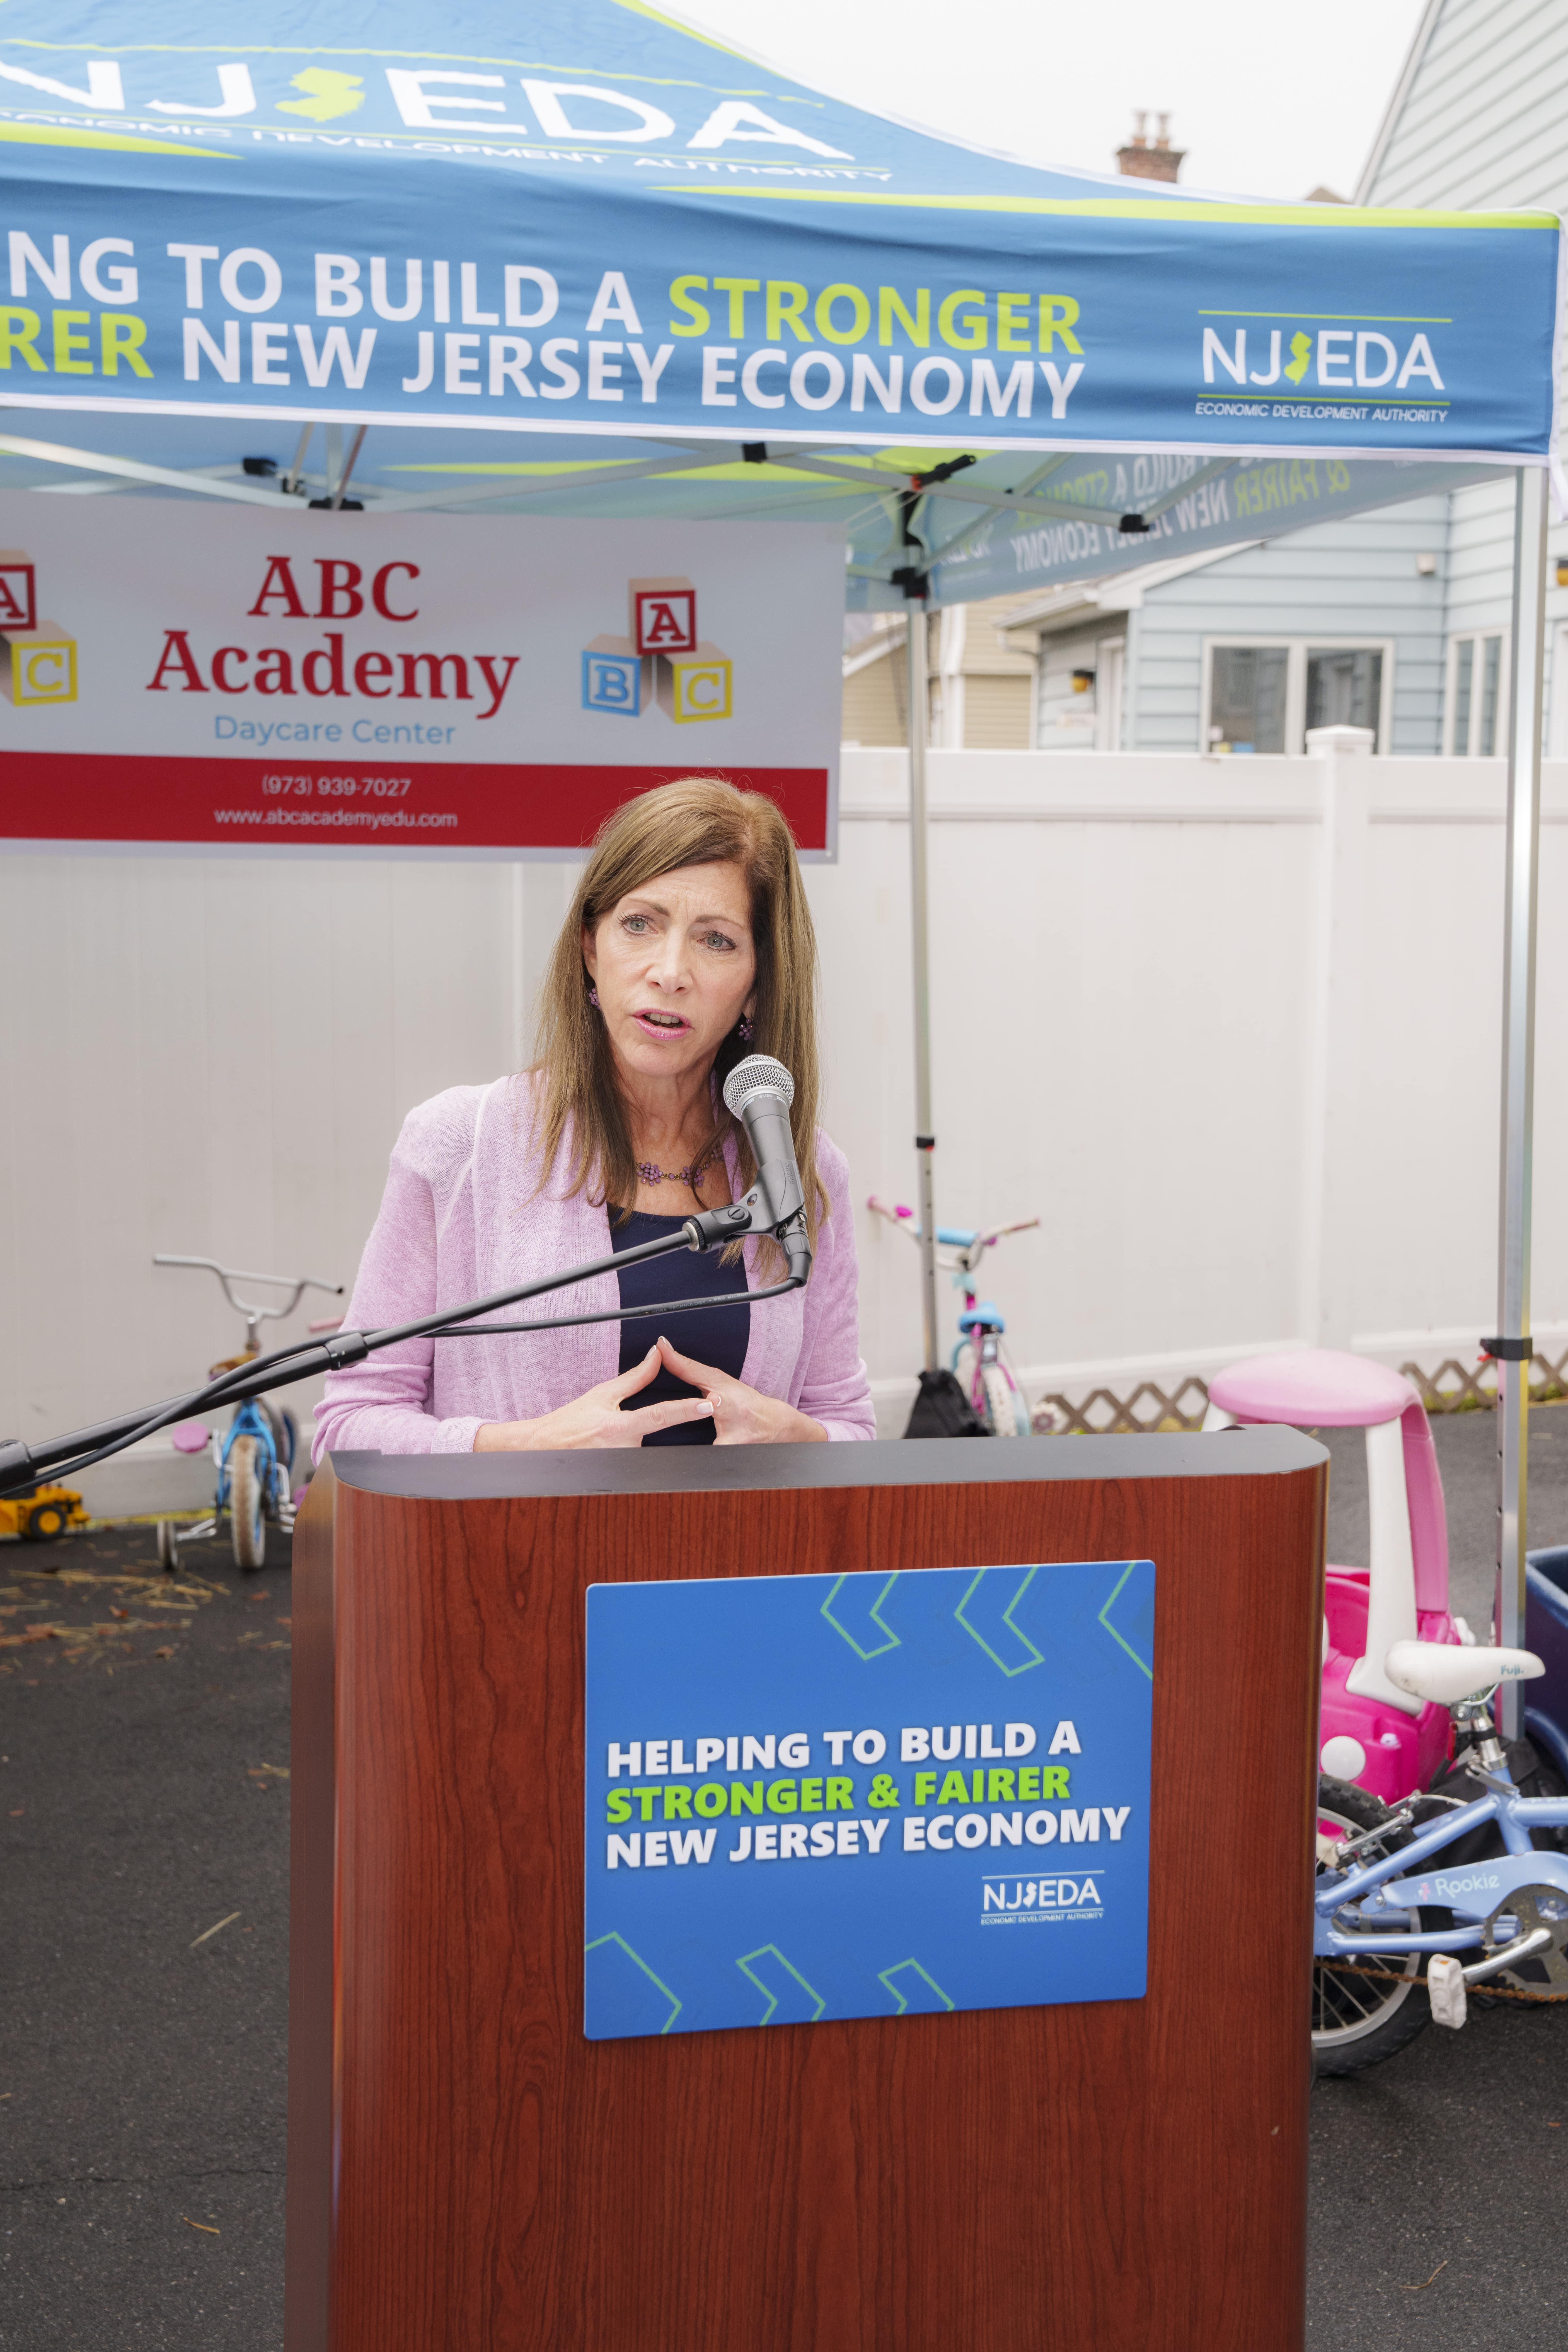 New Jersey First Lady Tammy Murphy Launches NJ Child Care Facilities Improvement Grant. (Courtesy of NJEDA)